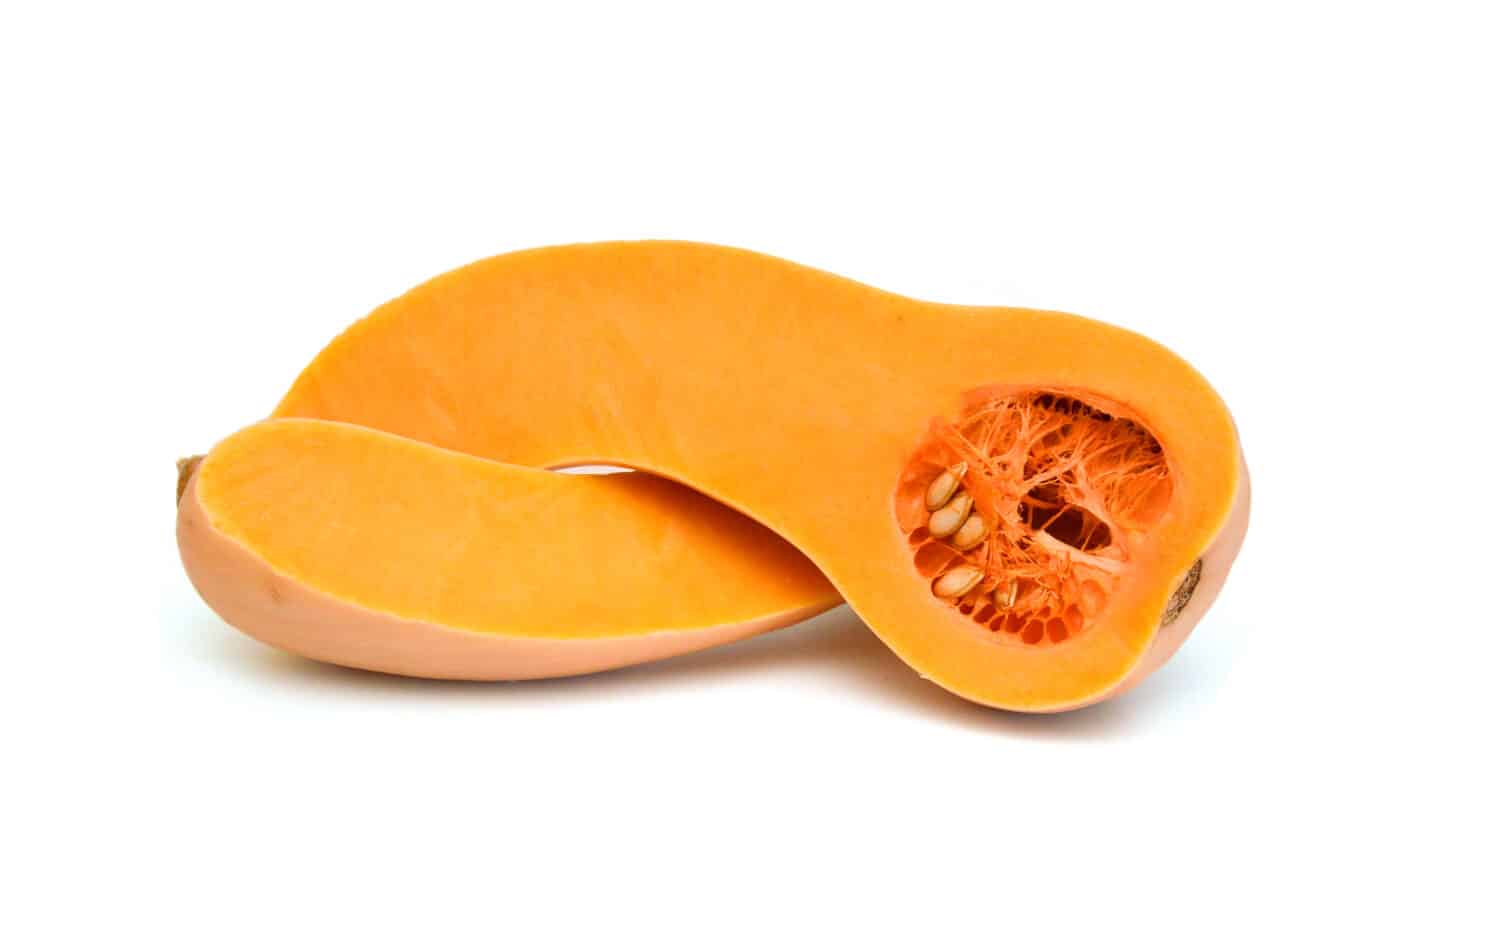 Nourishing nature's treasure: The butternut squash, with its creamy flesh and earthy sweetness, unveils the essence of wholesome indulgence, promising both comfort and culinary delight.